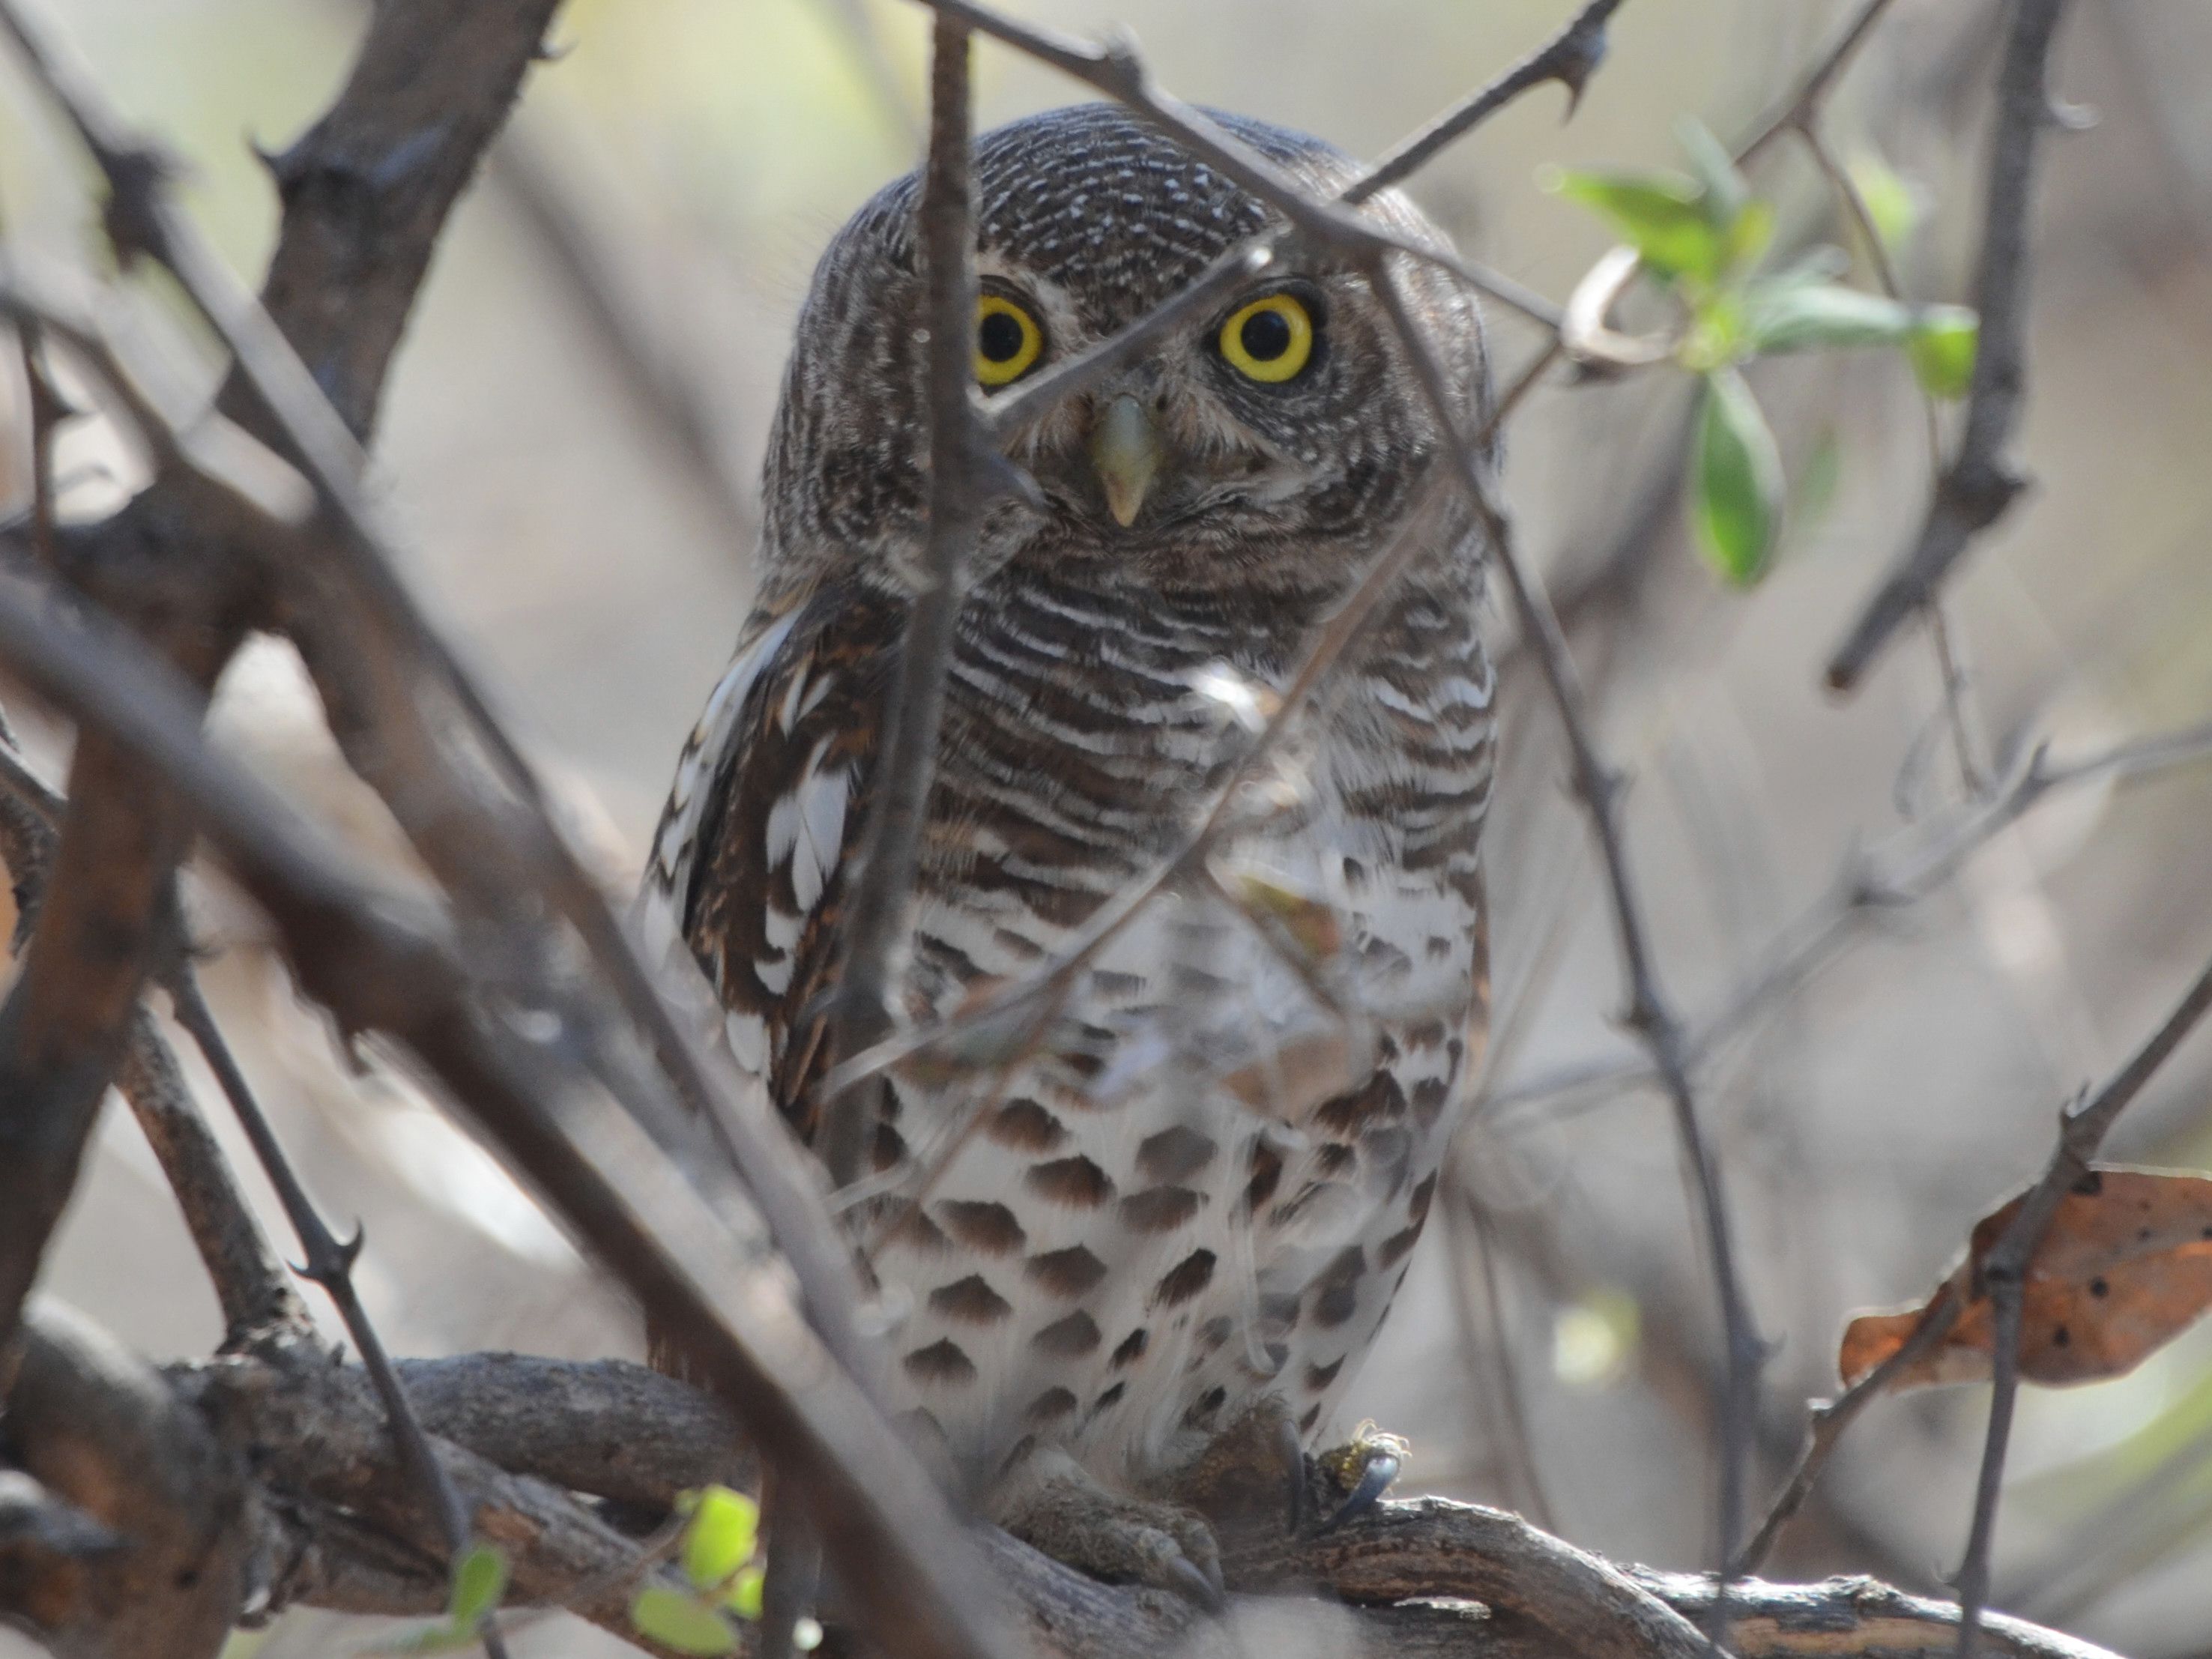 Click picture to see more African Barred Owlets.